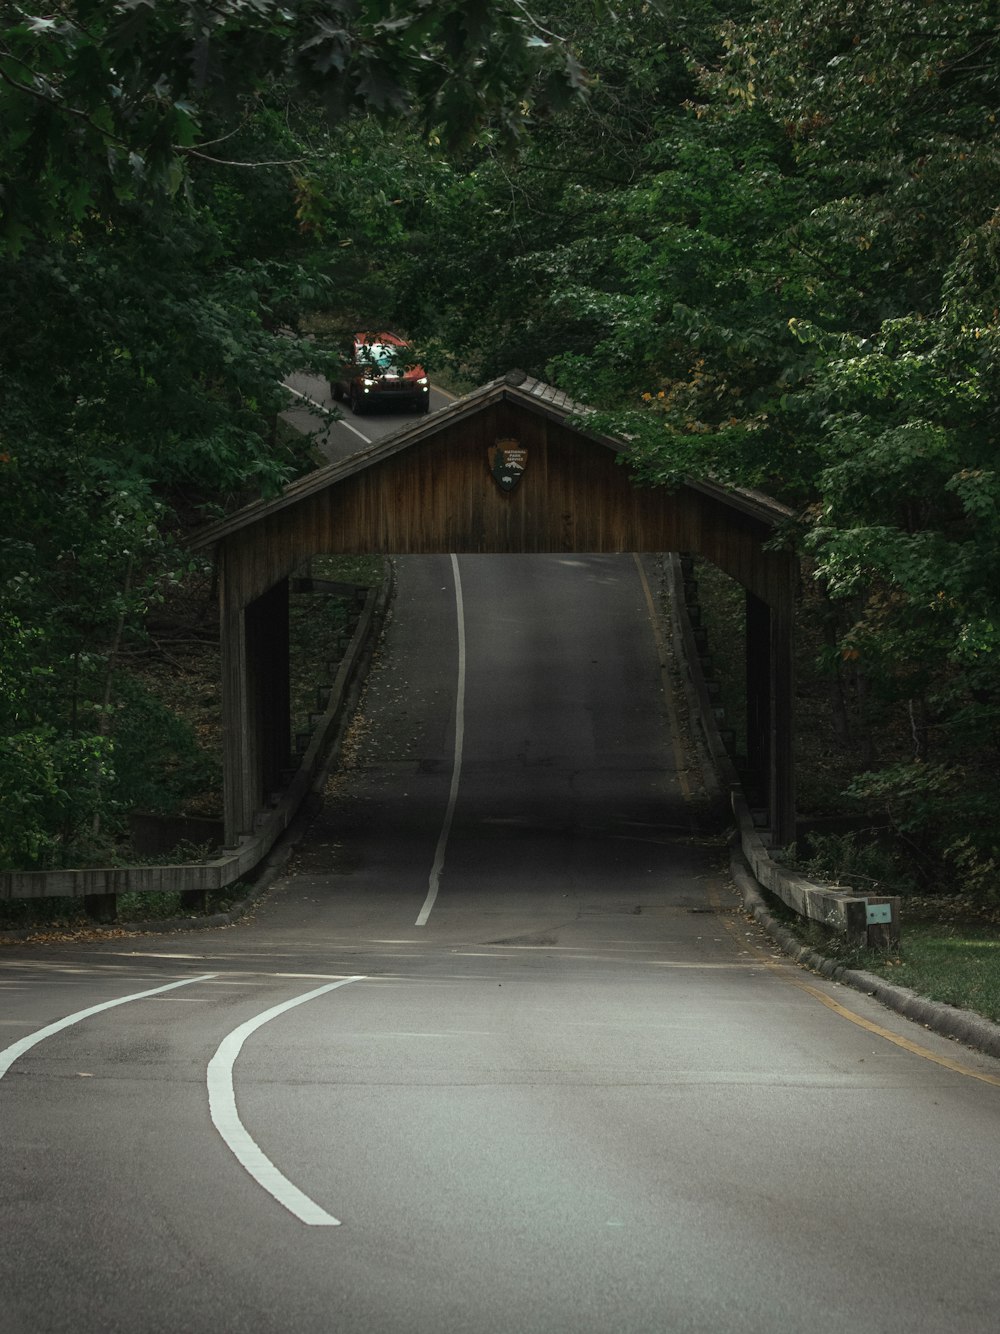 a car driving over a bridge in the middle of a forest